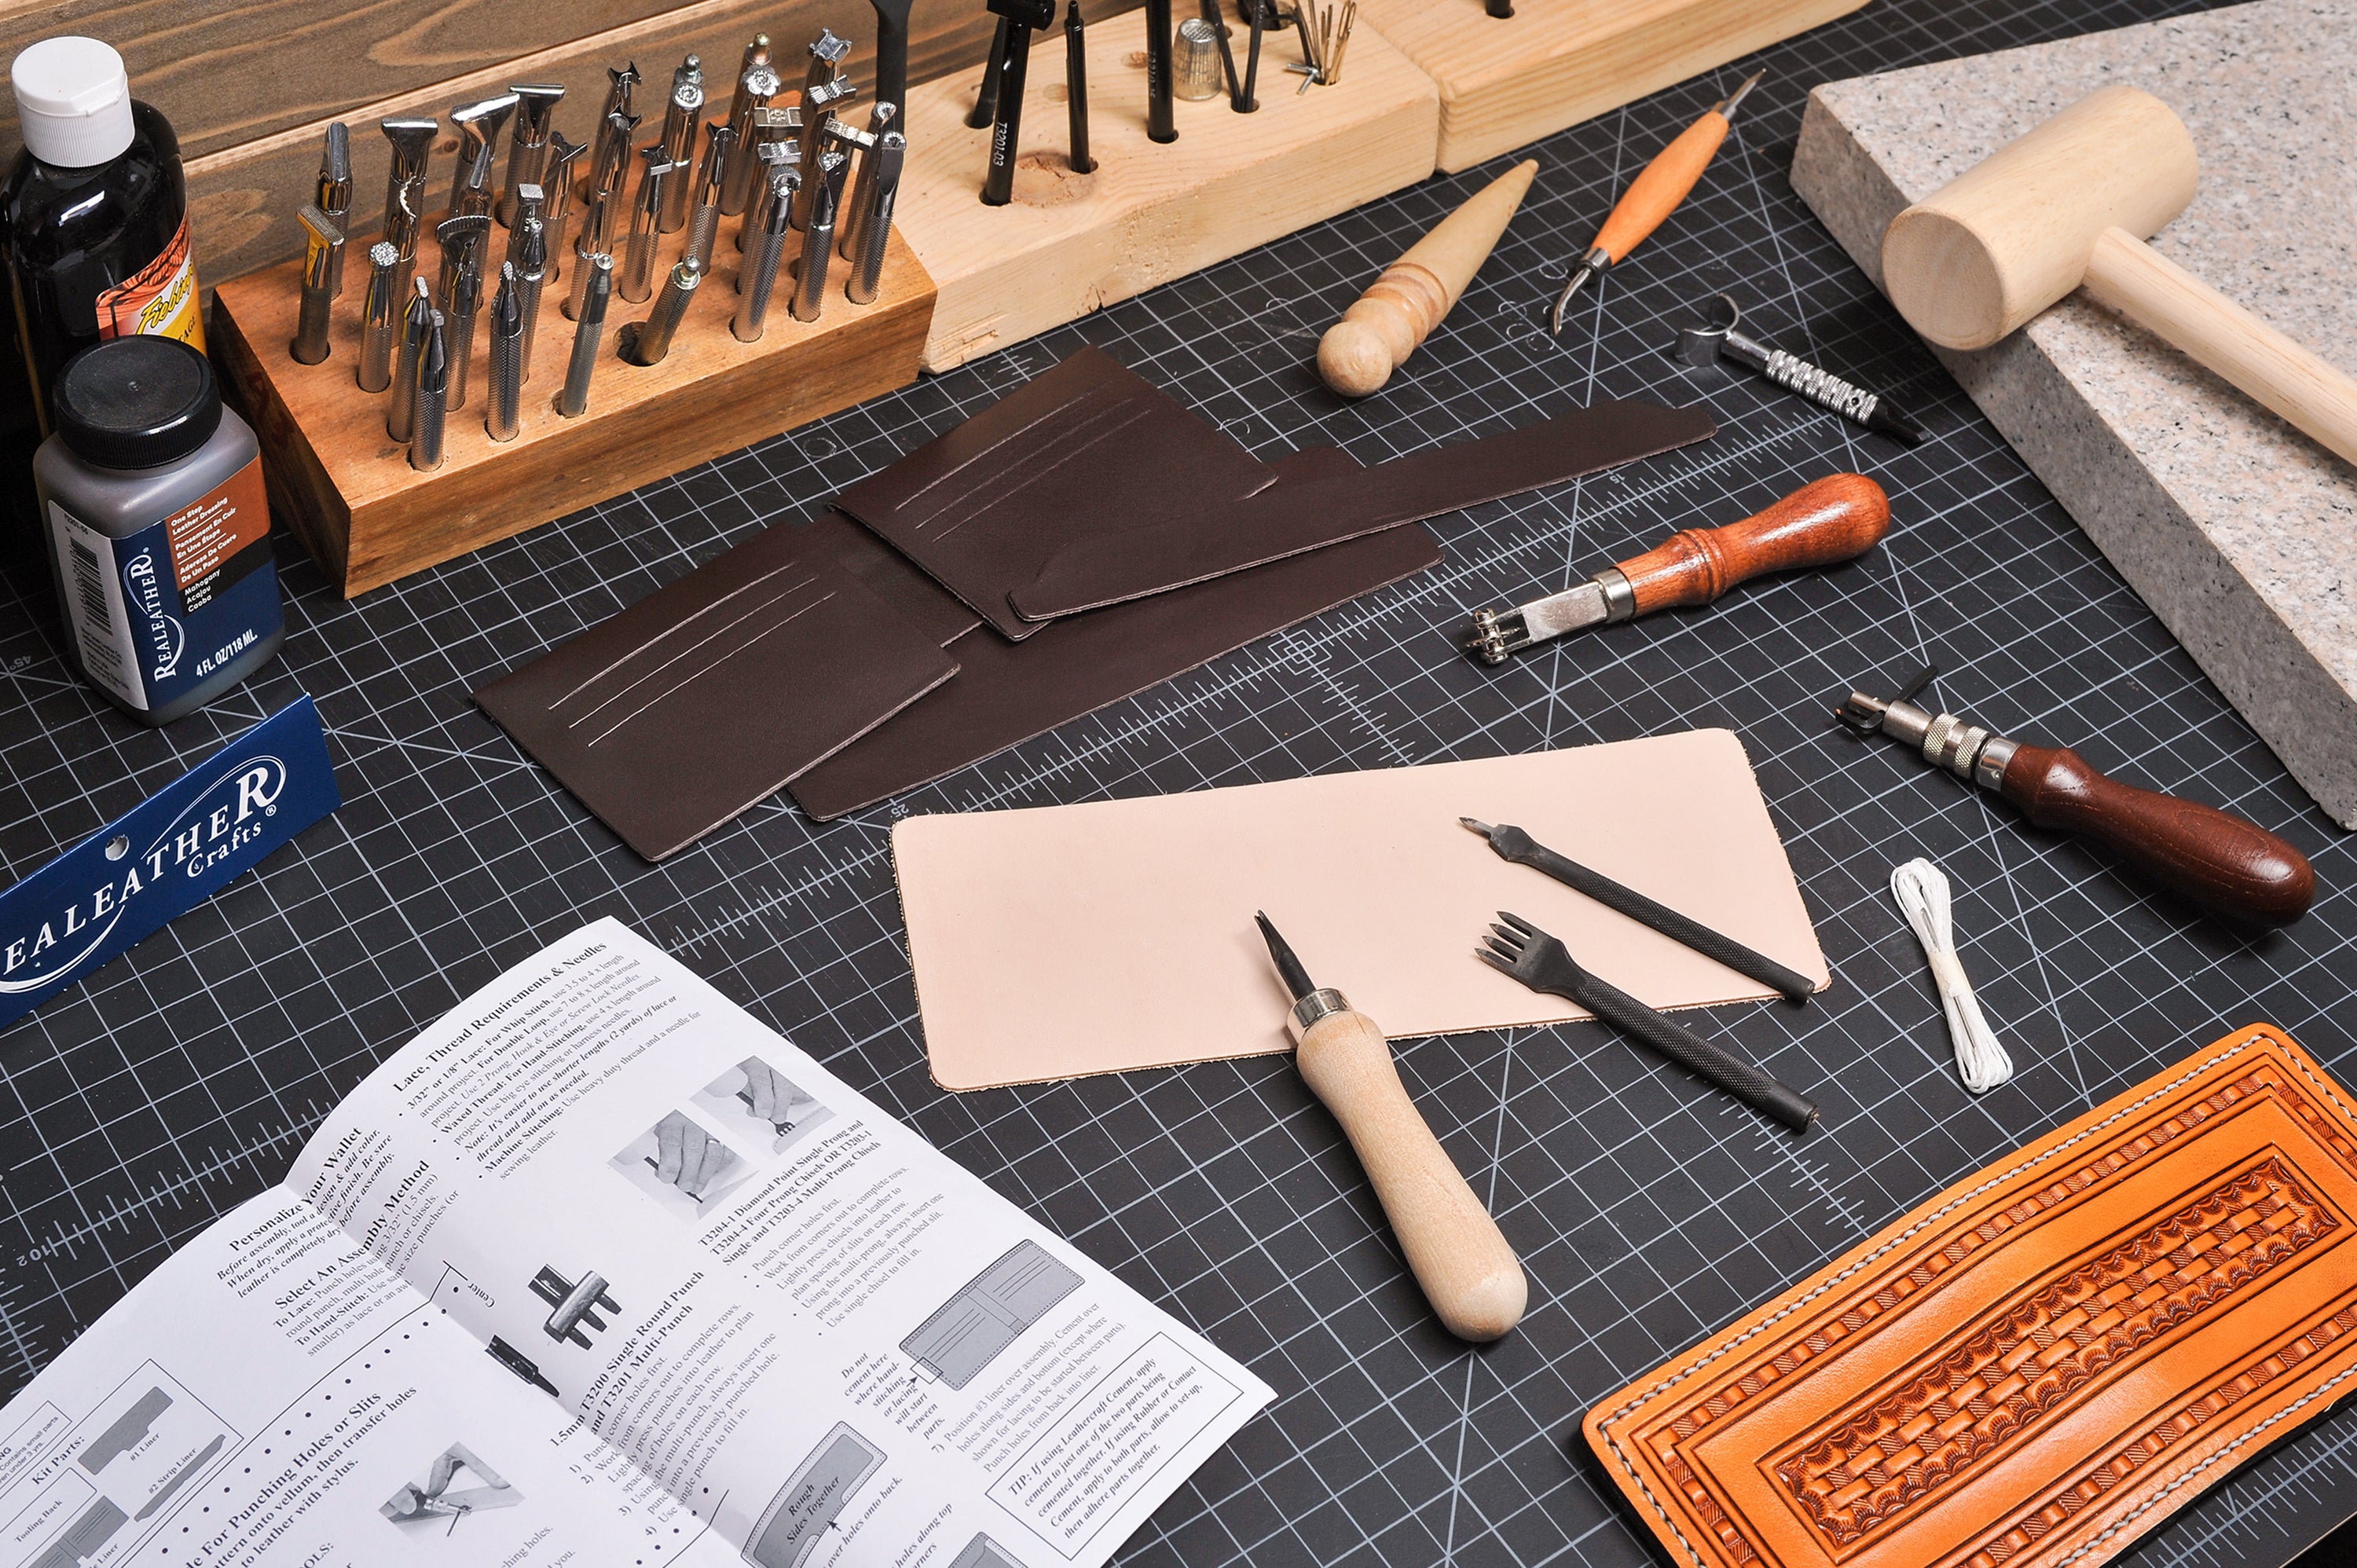 Introduction To Leatherwork With The Explore Leathercraft Kit